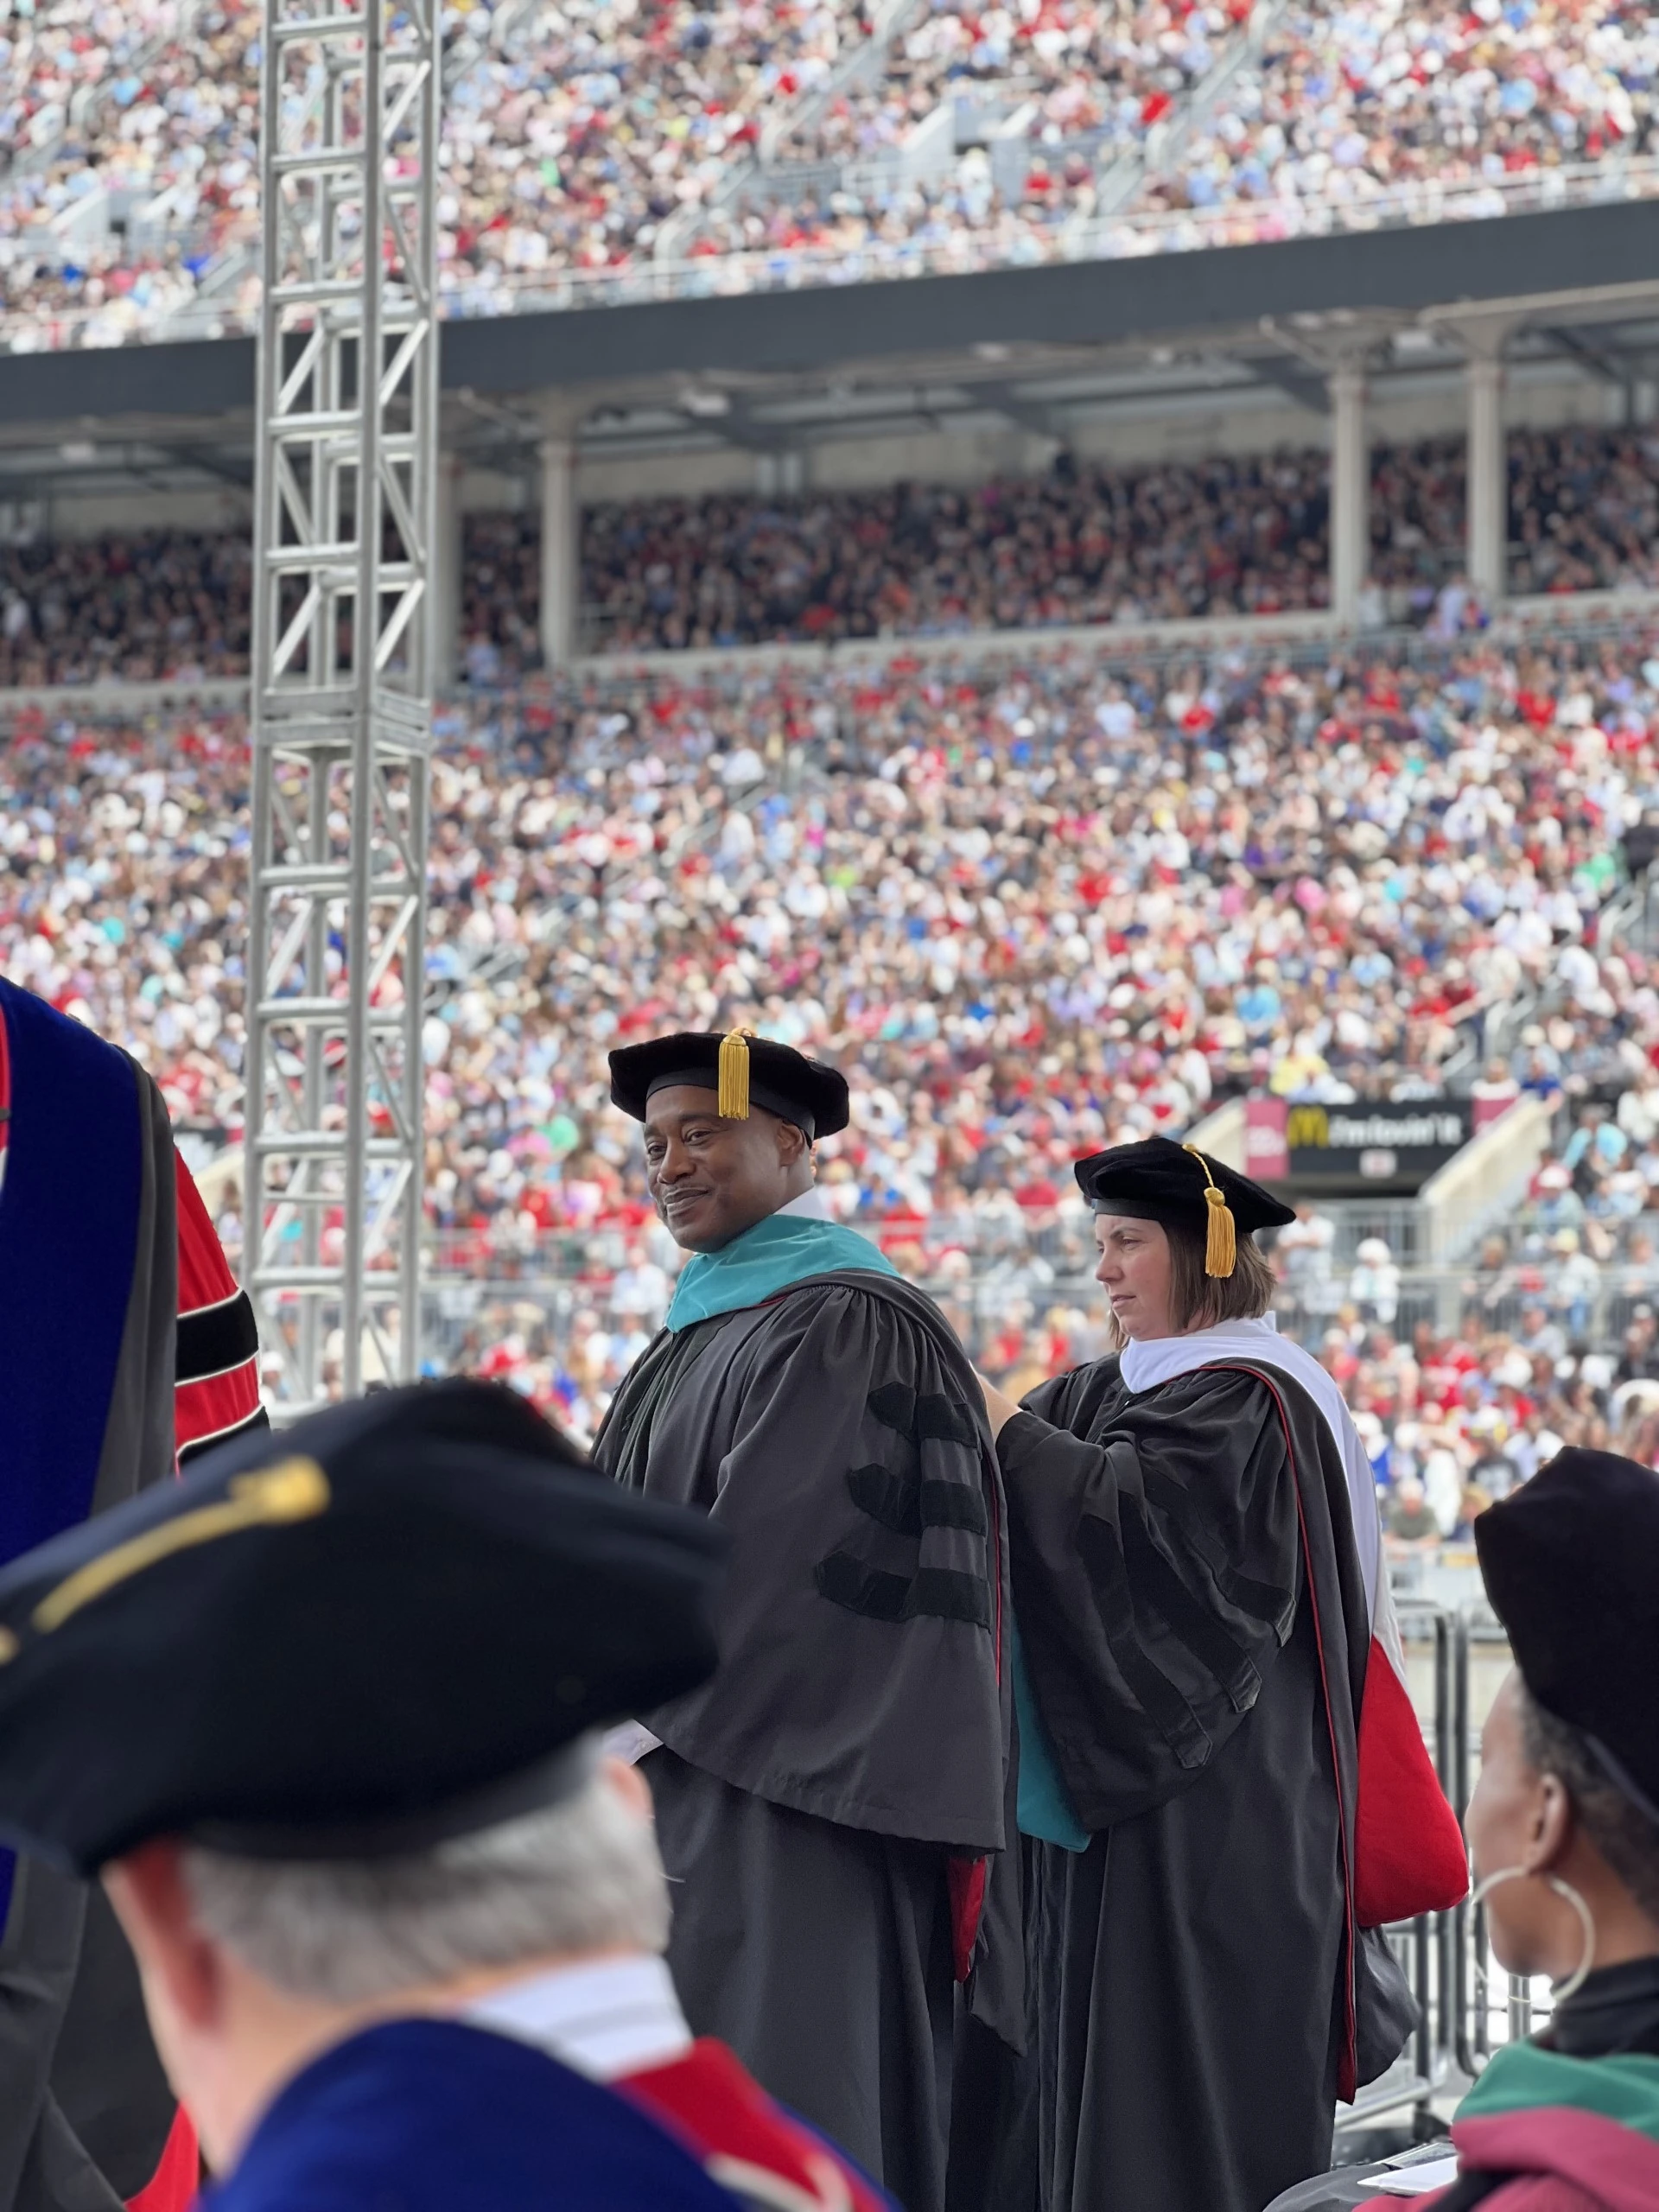 A Lifetime of Service Rewarded: Receiving an Honorary Doctorate from The Ohio State University